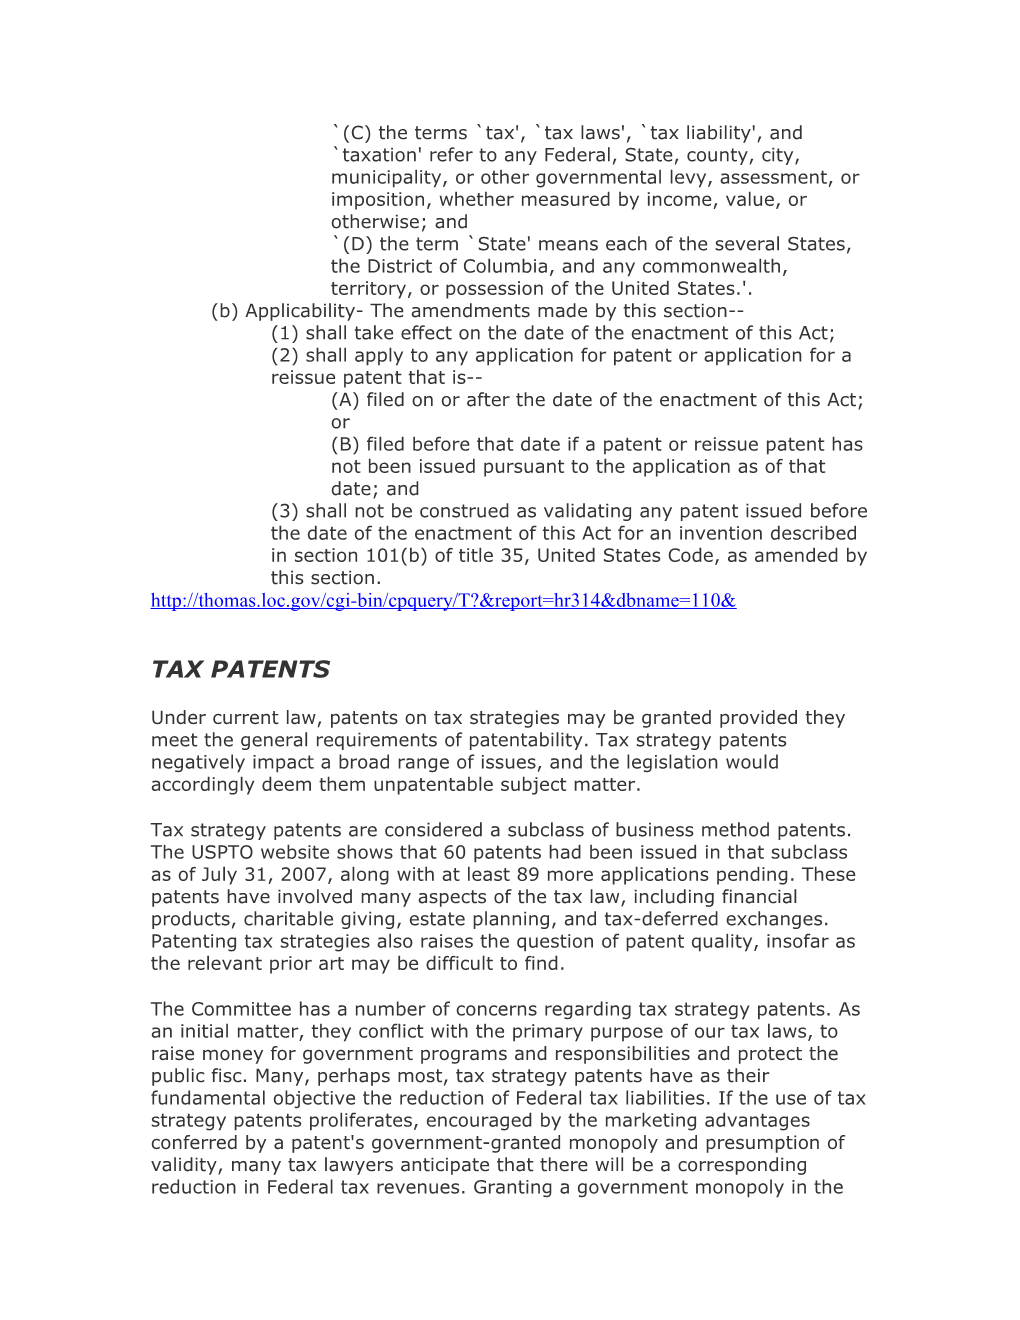 Section 10 of House Report 110-314 on HR 1908 Patent Reform Act of 2007 - Sept. 4, 2007